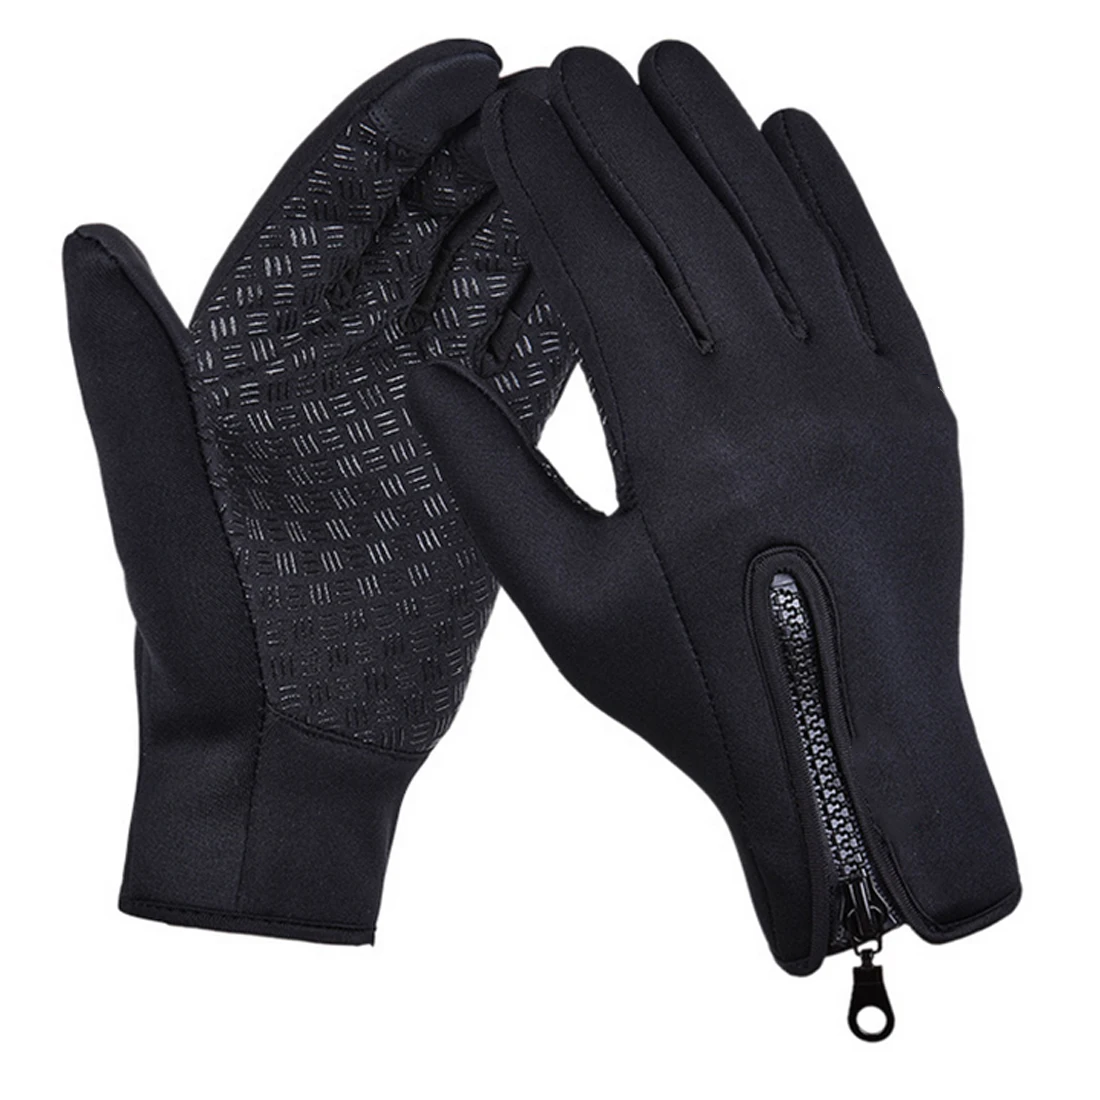 Winter Running Gloves Women Men Outdoor Sports Gloves Full Finger Outdoor Glove Breathable Cycling Casual Gloves 1 Pair New - Цвет: 9